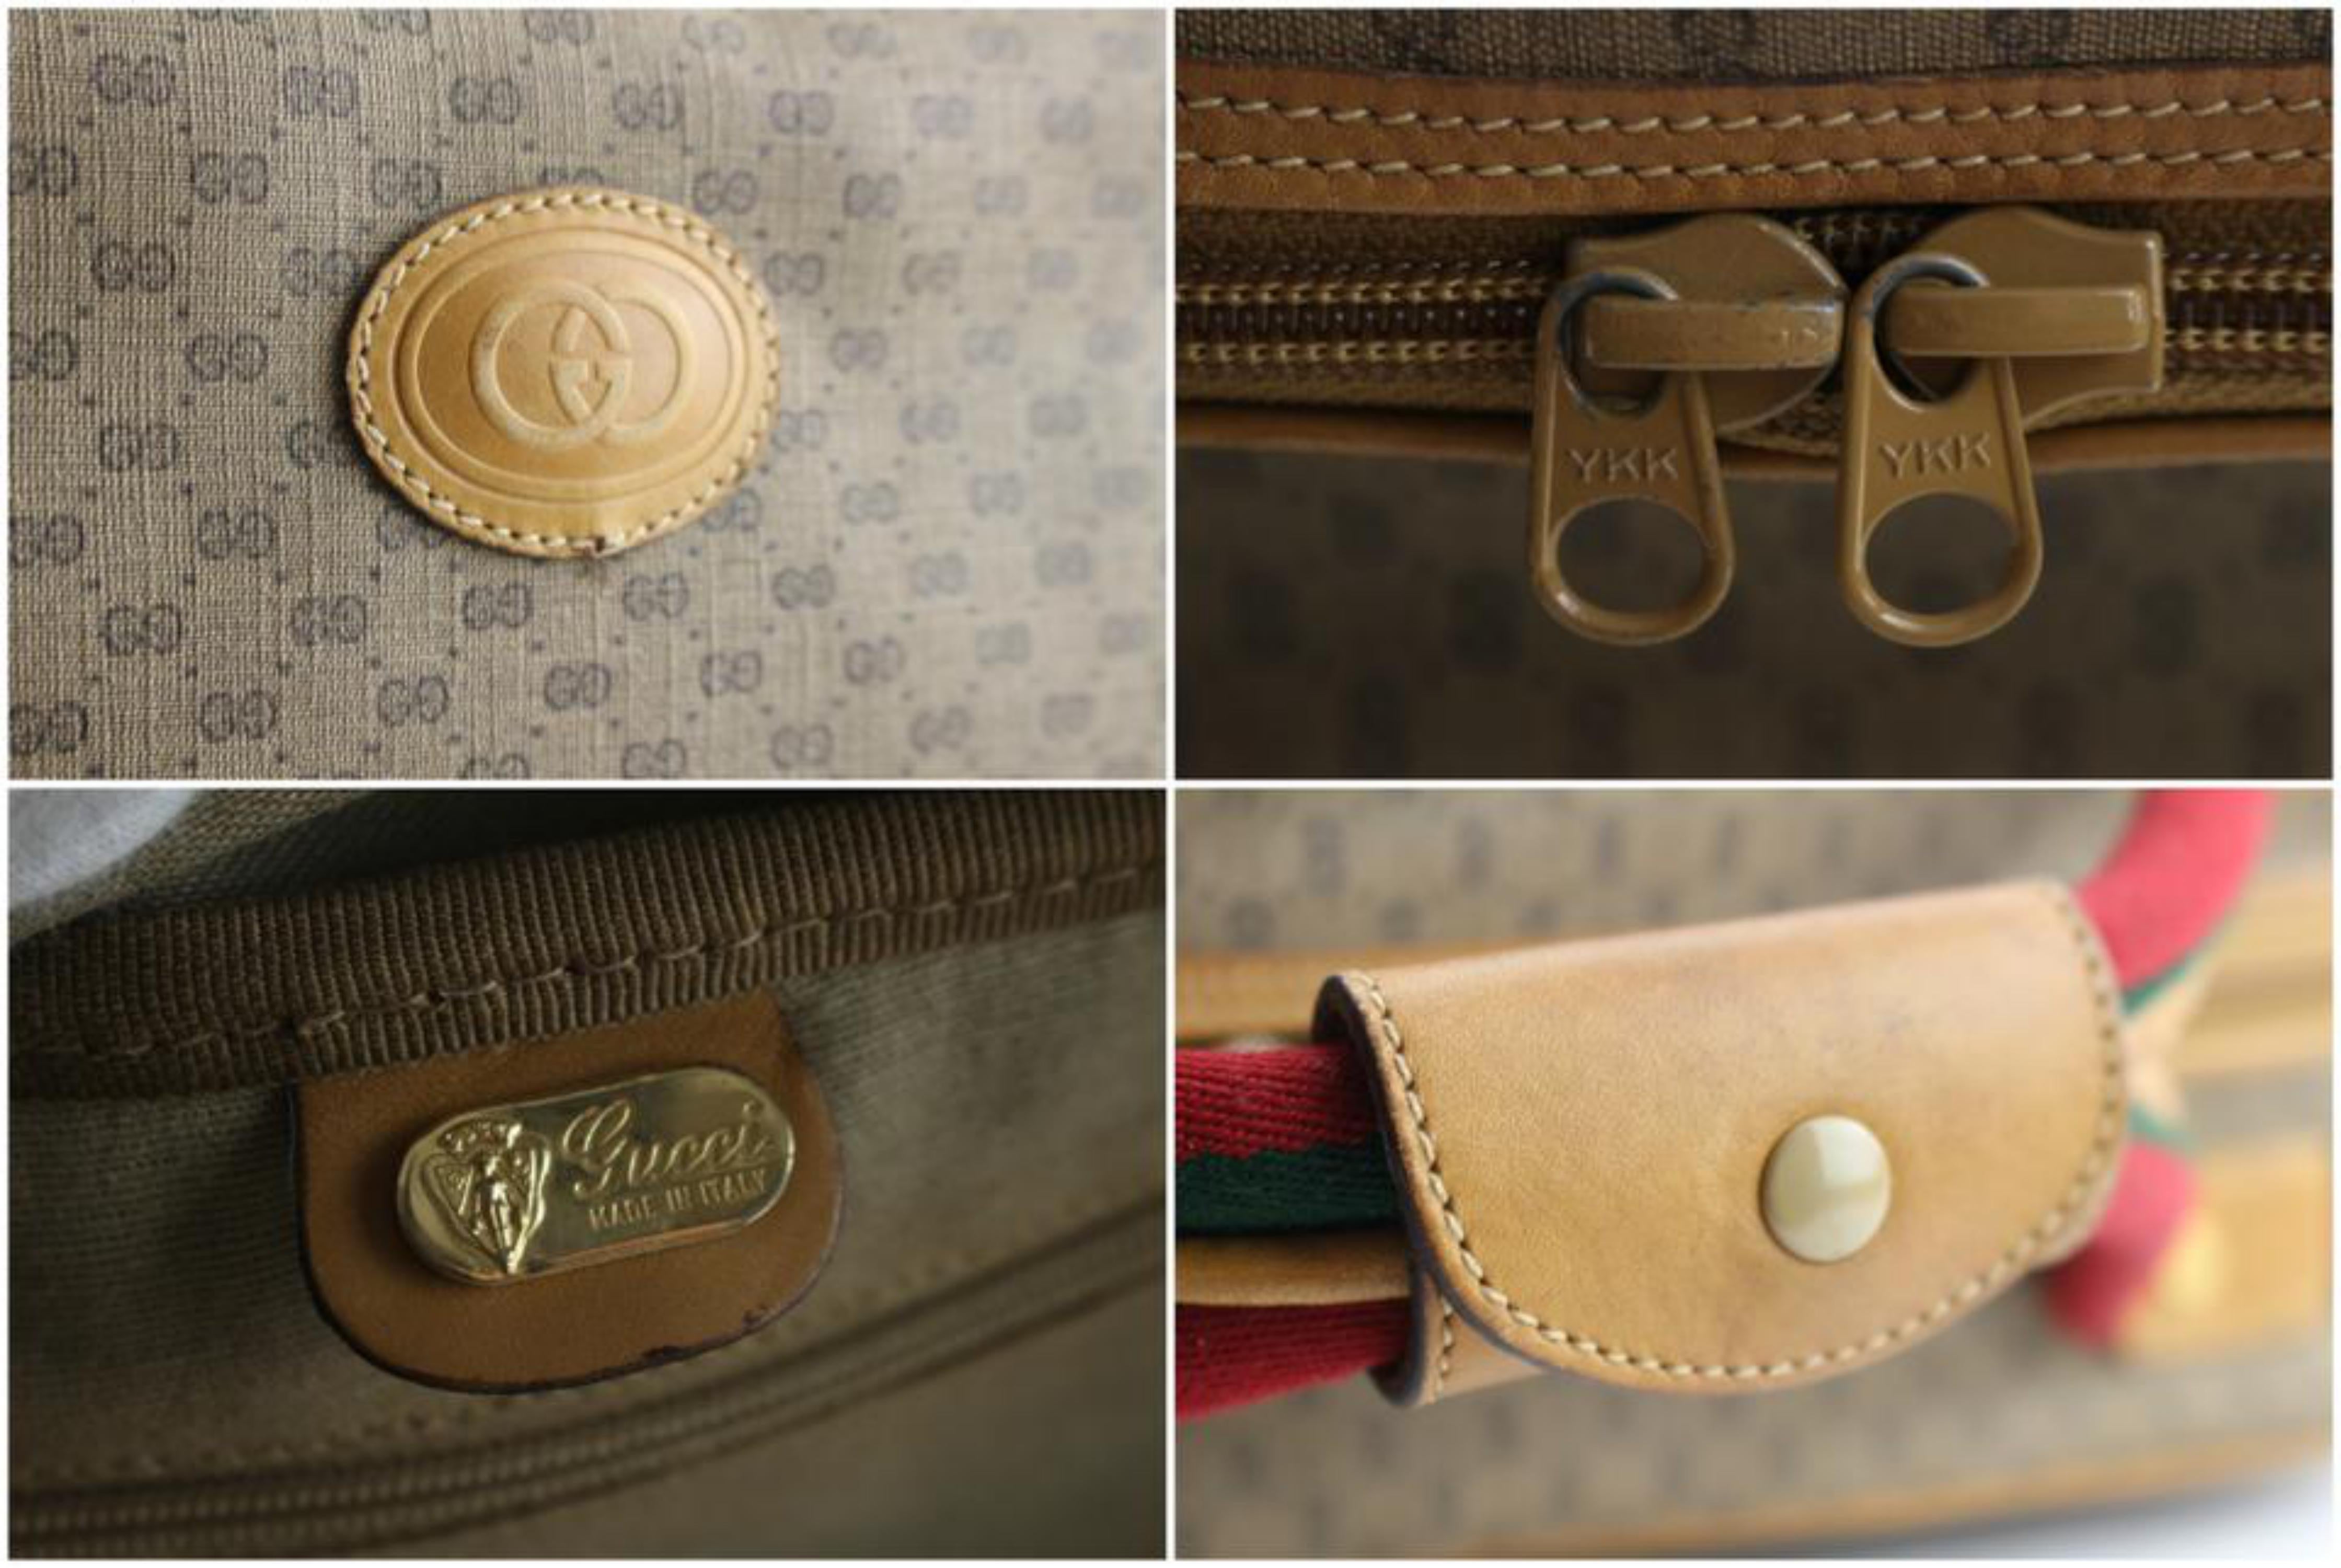 Gucci Duffle Web Monogram Suitcase 224269 Beige Leather Weekend/Travel Bag For Sale 3